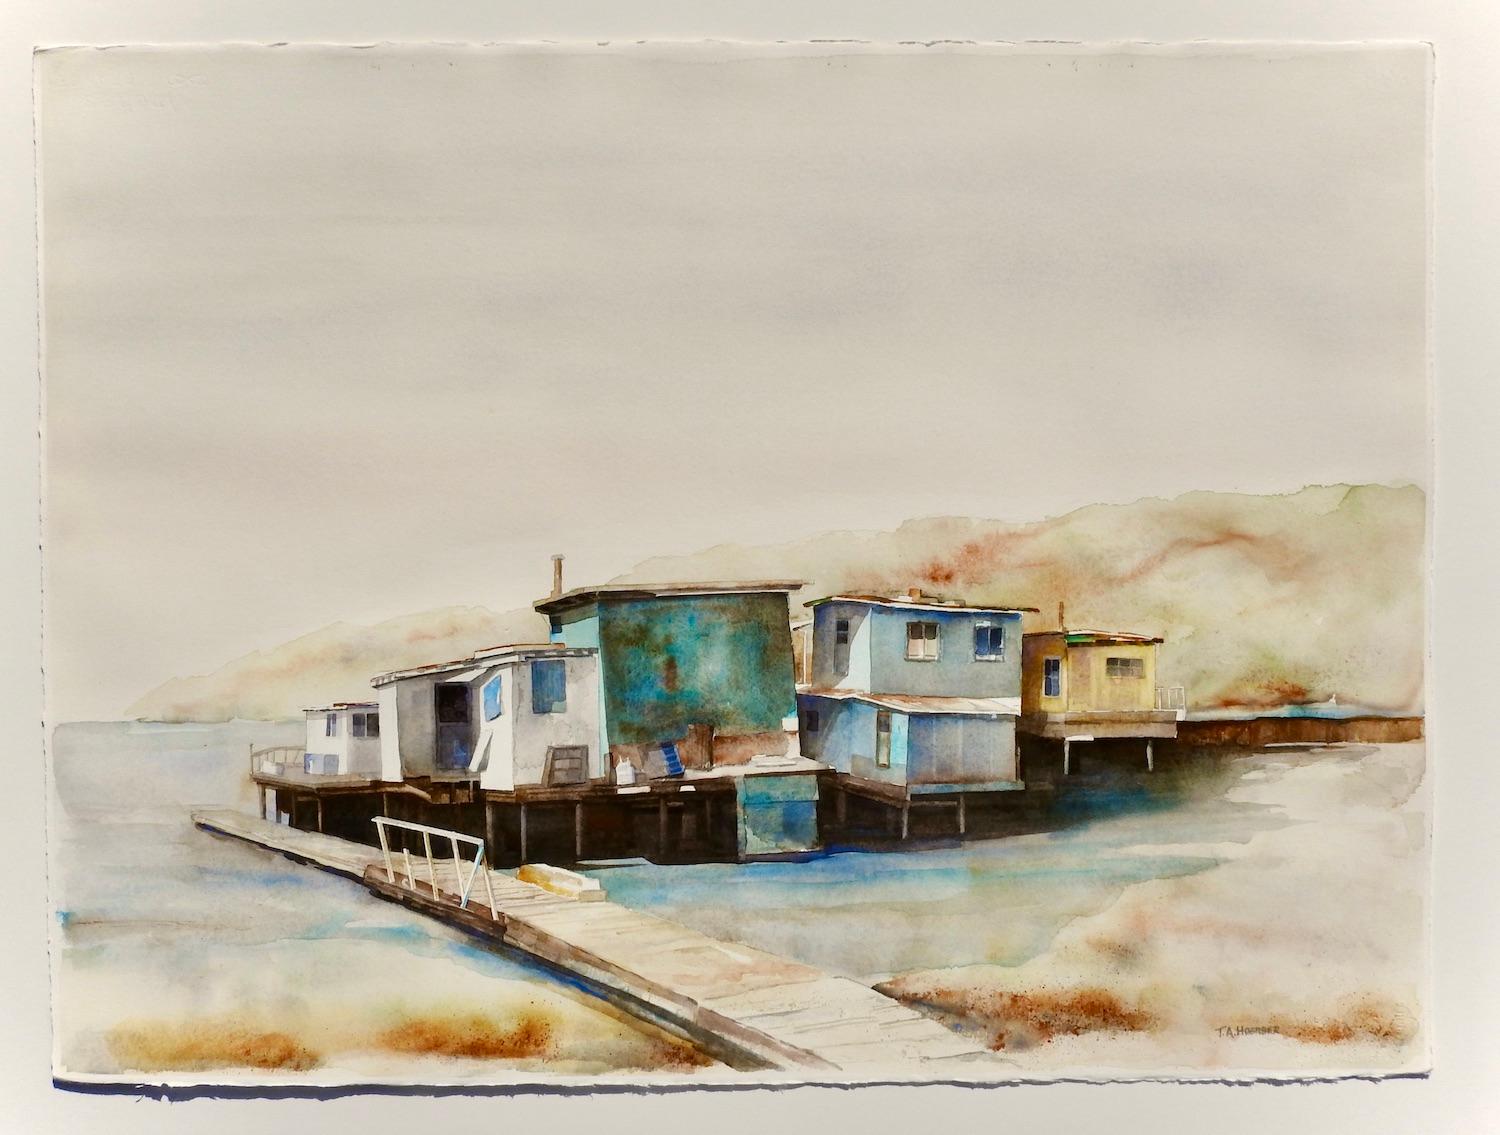 <p>Artist Comments<br>A cluster of shacks perches on the shallow side of the water. During a trip to Sausalito, California, artist Thomas Hoerber detours to the back of San Francisco Bay, where he sees these simple dwellings. Finding solace in the